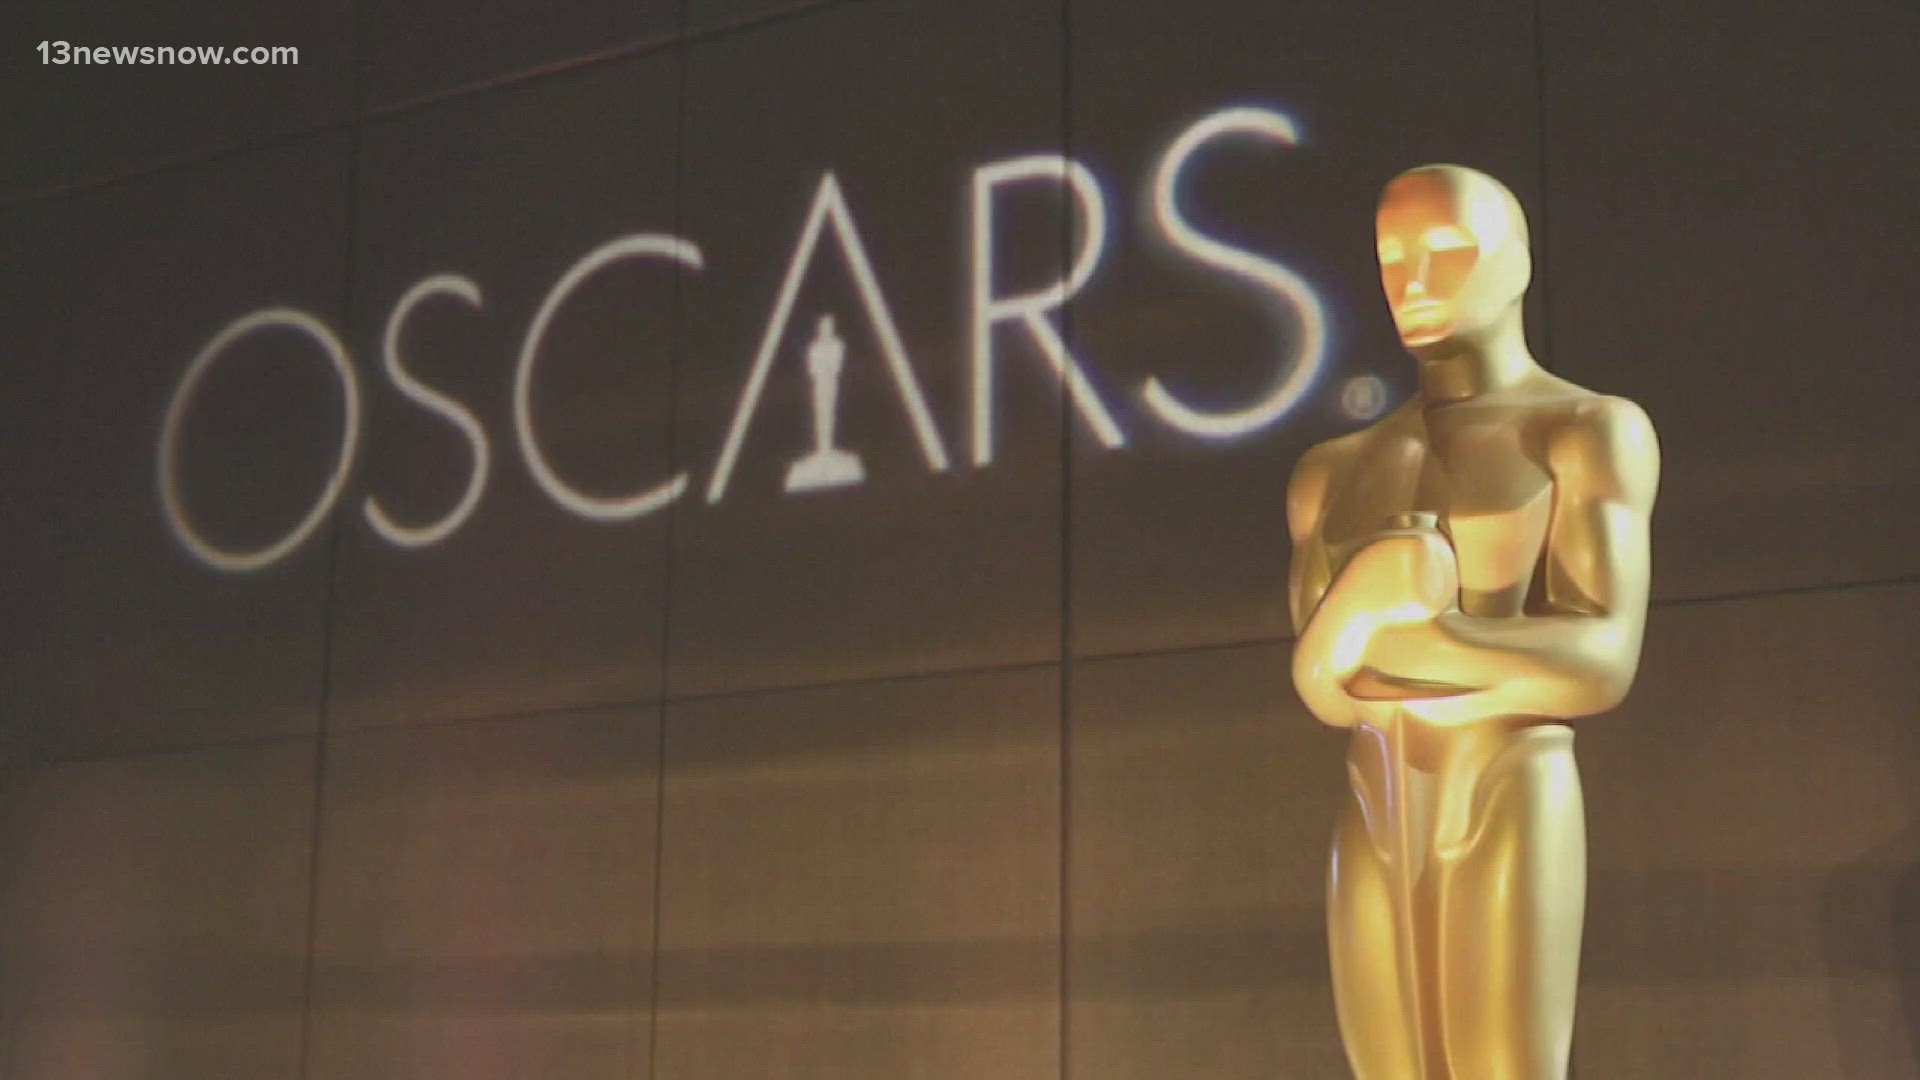 Preparations for the Oscars are in full swing, with the big night just two days away. ABC’s Reena Roy has a preview from the champagne carpet in Hollywood.